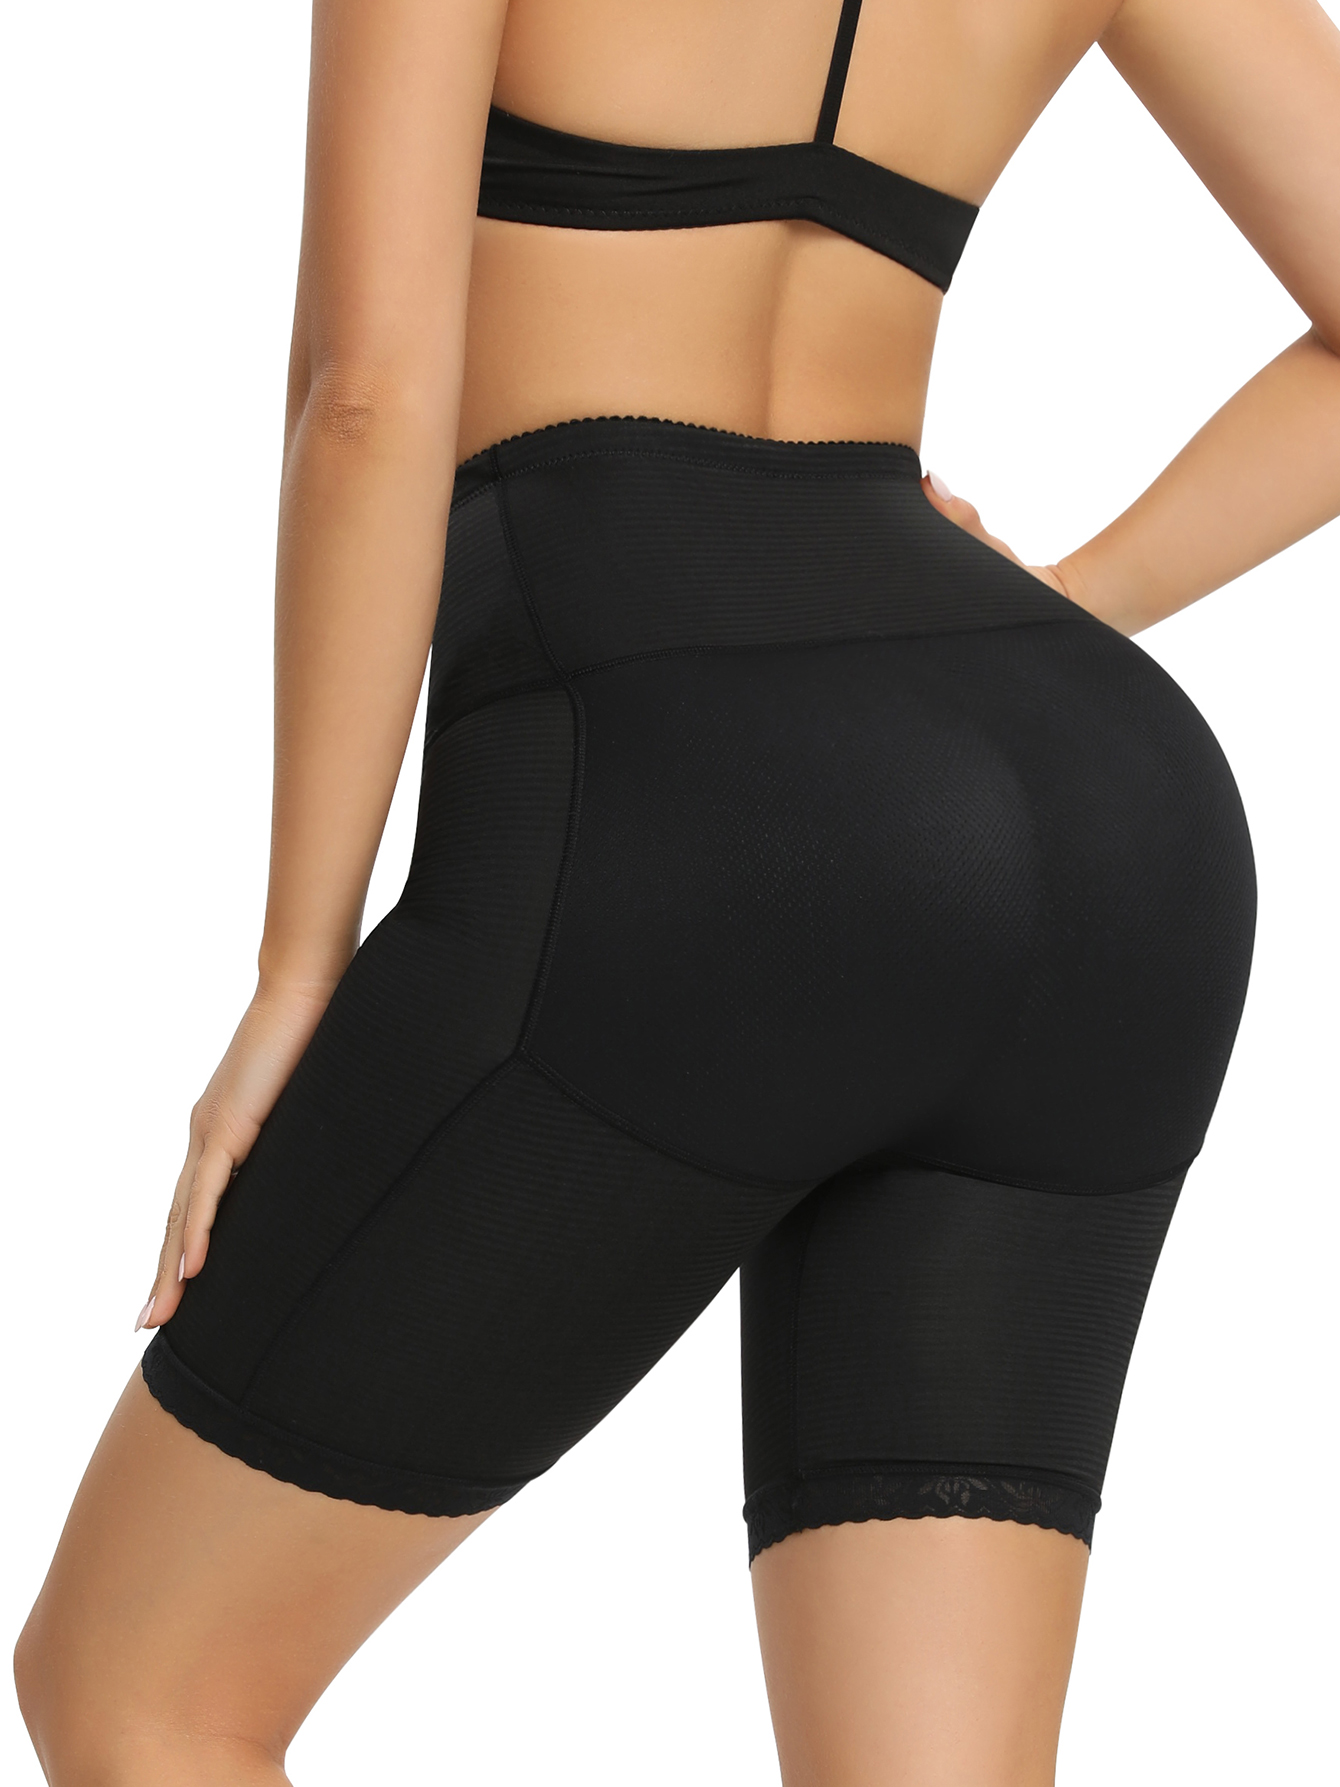 Butt-Lifter Extra Firm Tummy Control Shapewear Shorts For Women LT. Rose  21995